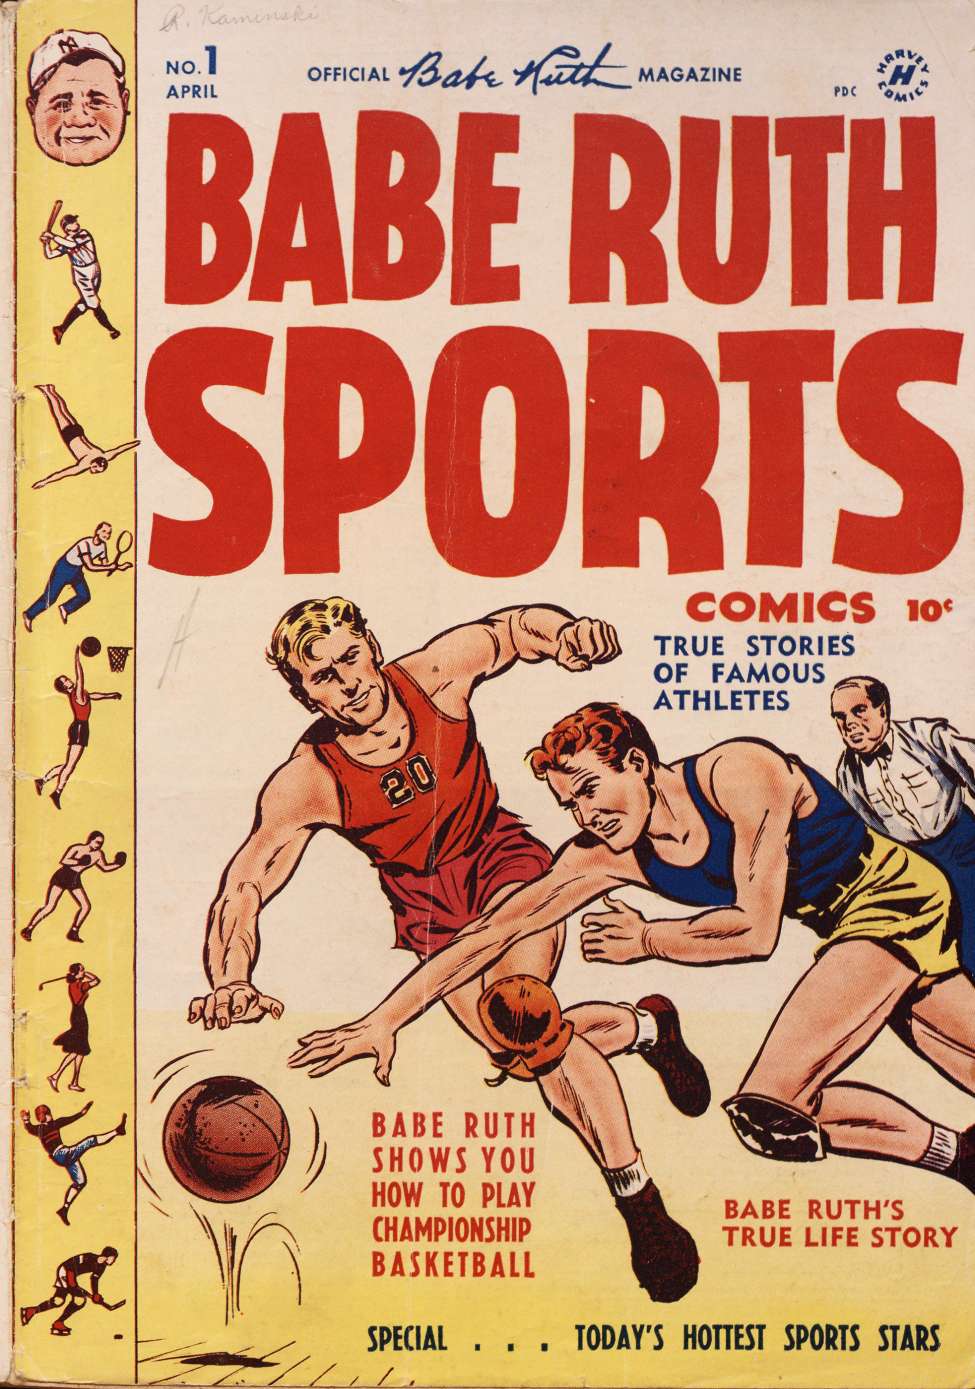 Book Cover For Babe Ruth Sports Comics 1 - Version 1